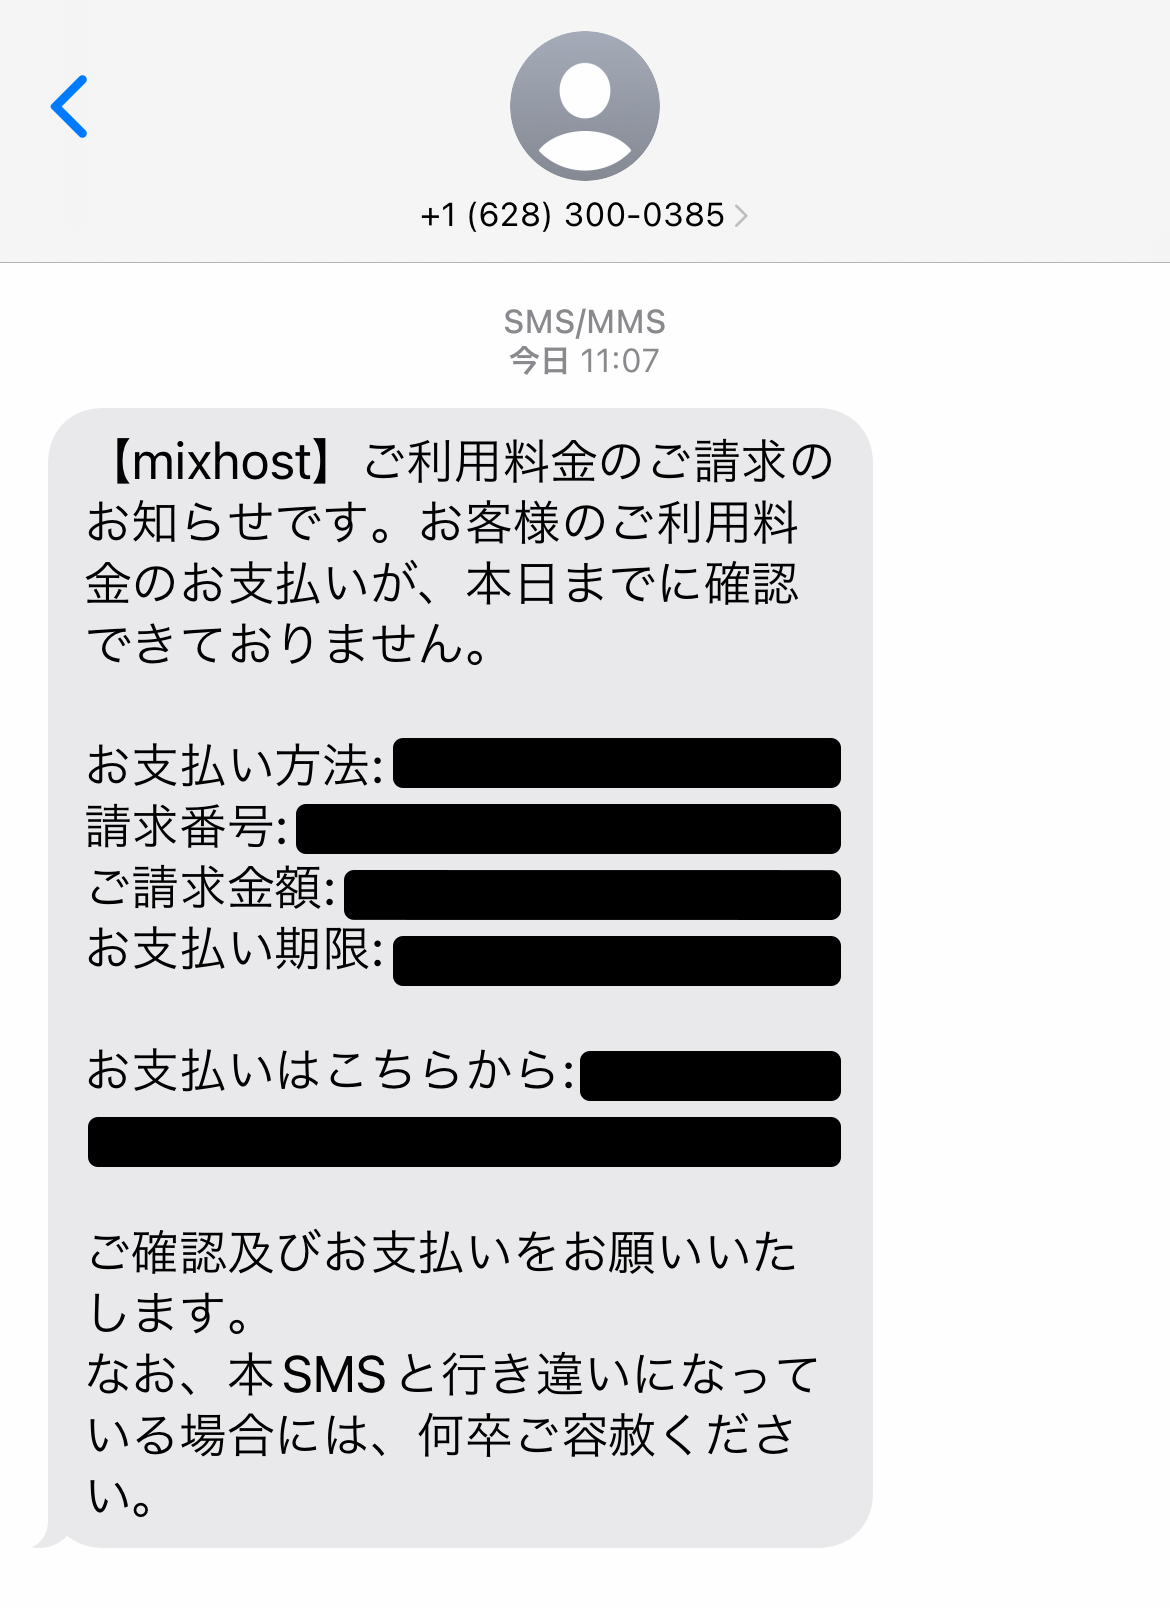 SMS001.png